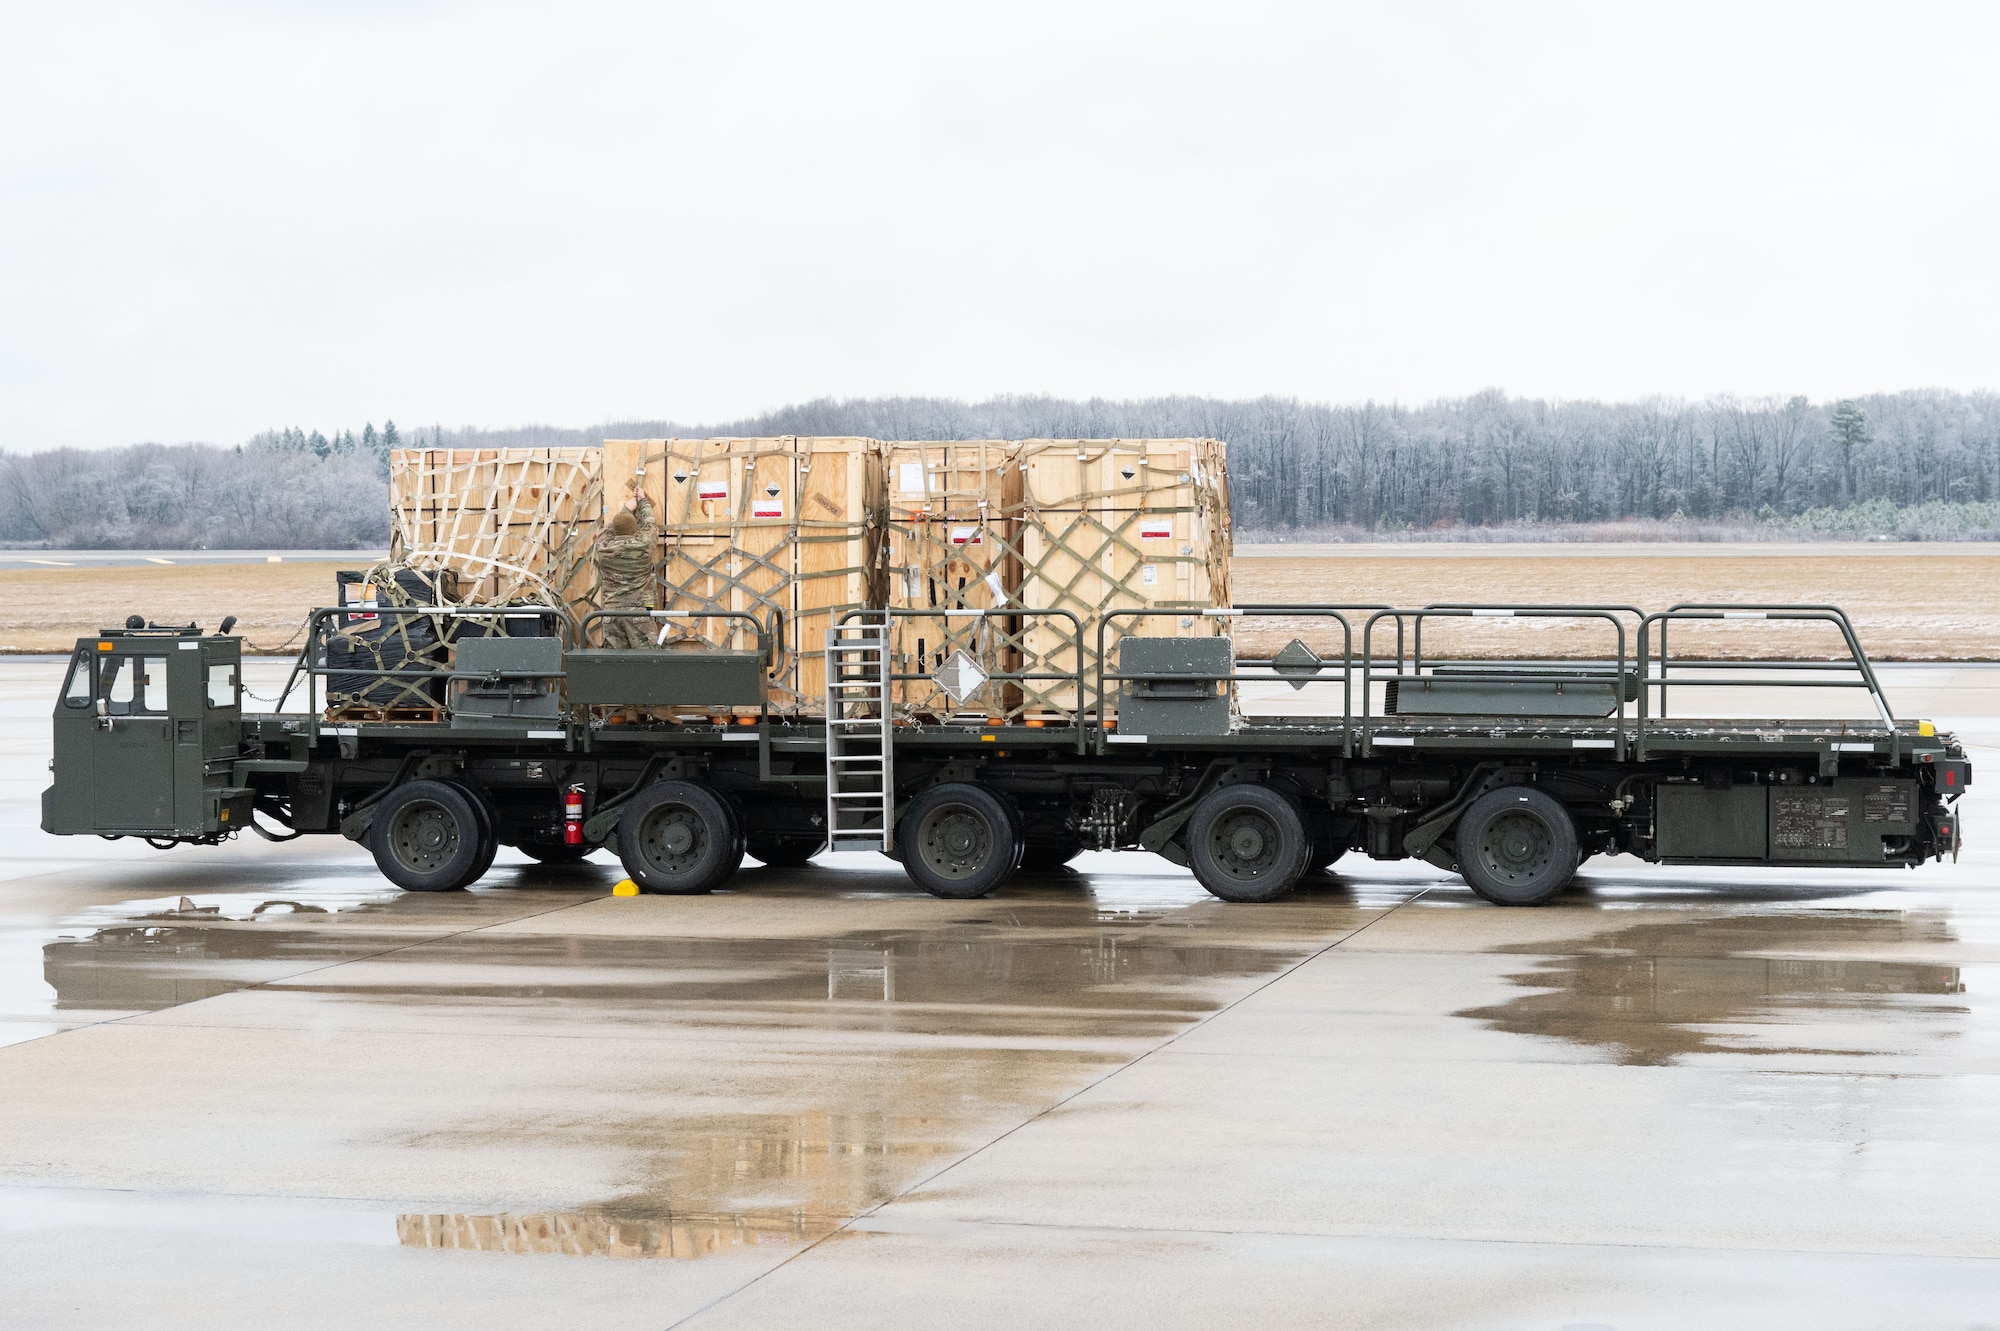 A cargo loader carrying palletized Forward Operating Base equipment sits on the flight line at Dover Air Force Base, Delaware, Feb. 1, 2023. The FOB equipment will be used to support the U.S. Navy MQ-4C Triton Orbit 1 operations at Andersen AFB, Guam. The MQ-4C is an unmanned aerial vehicle operated by the U.S. Navy for maritime patrol supporting intelligence, surveillance and reconnaissance operations. (U.S. Air Force photo by Roland Balik)